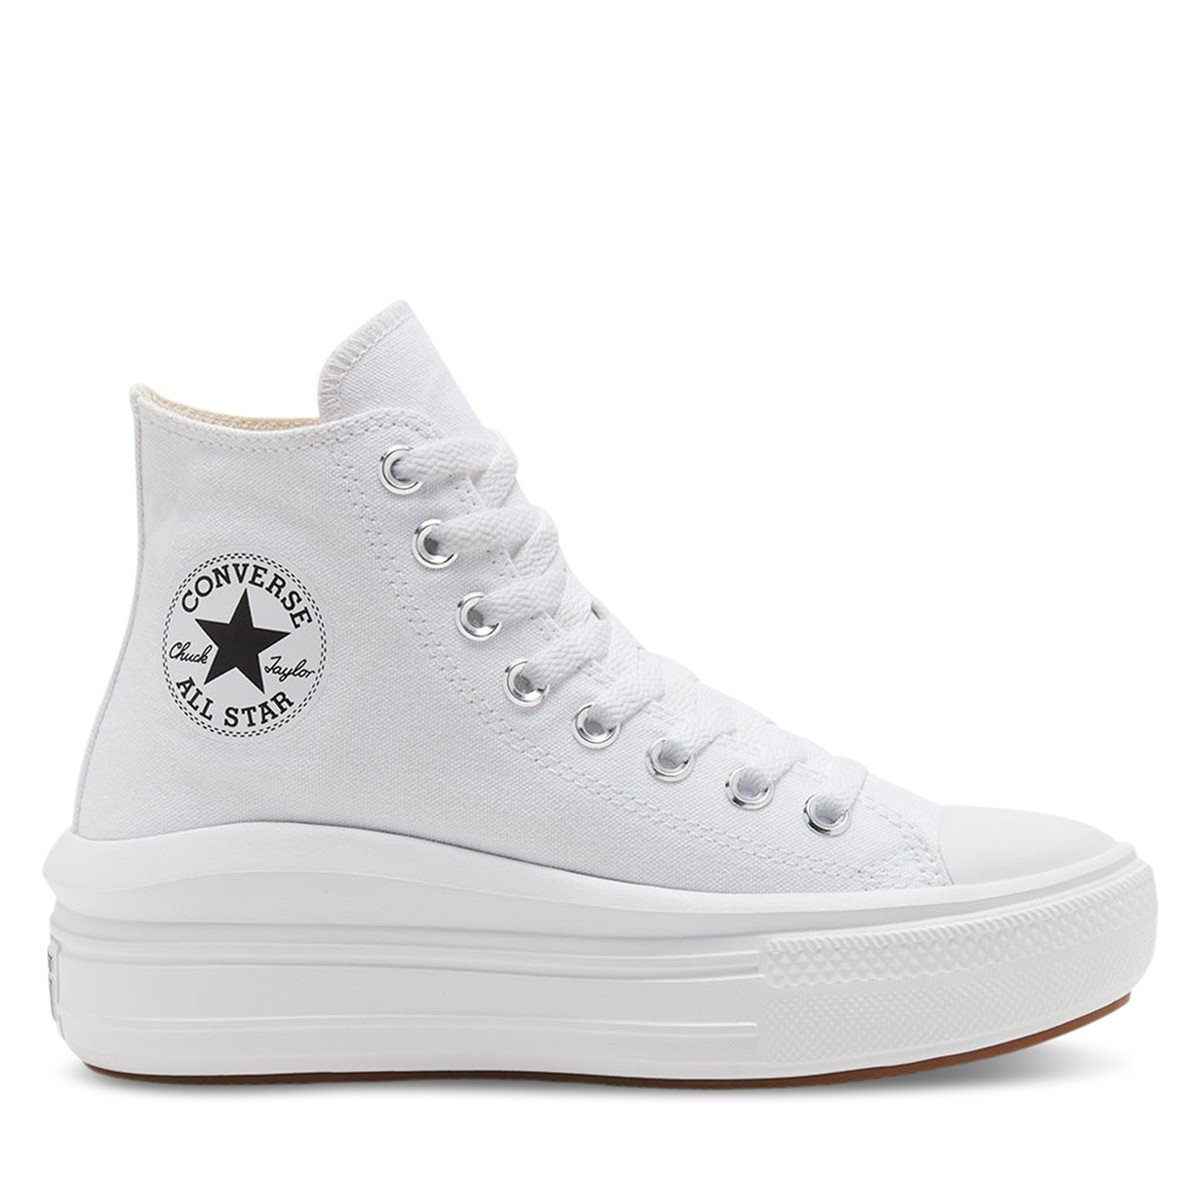 Women's Chuck Taylor All Star Move Hi Sneakers in White